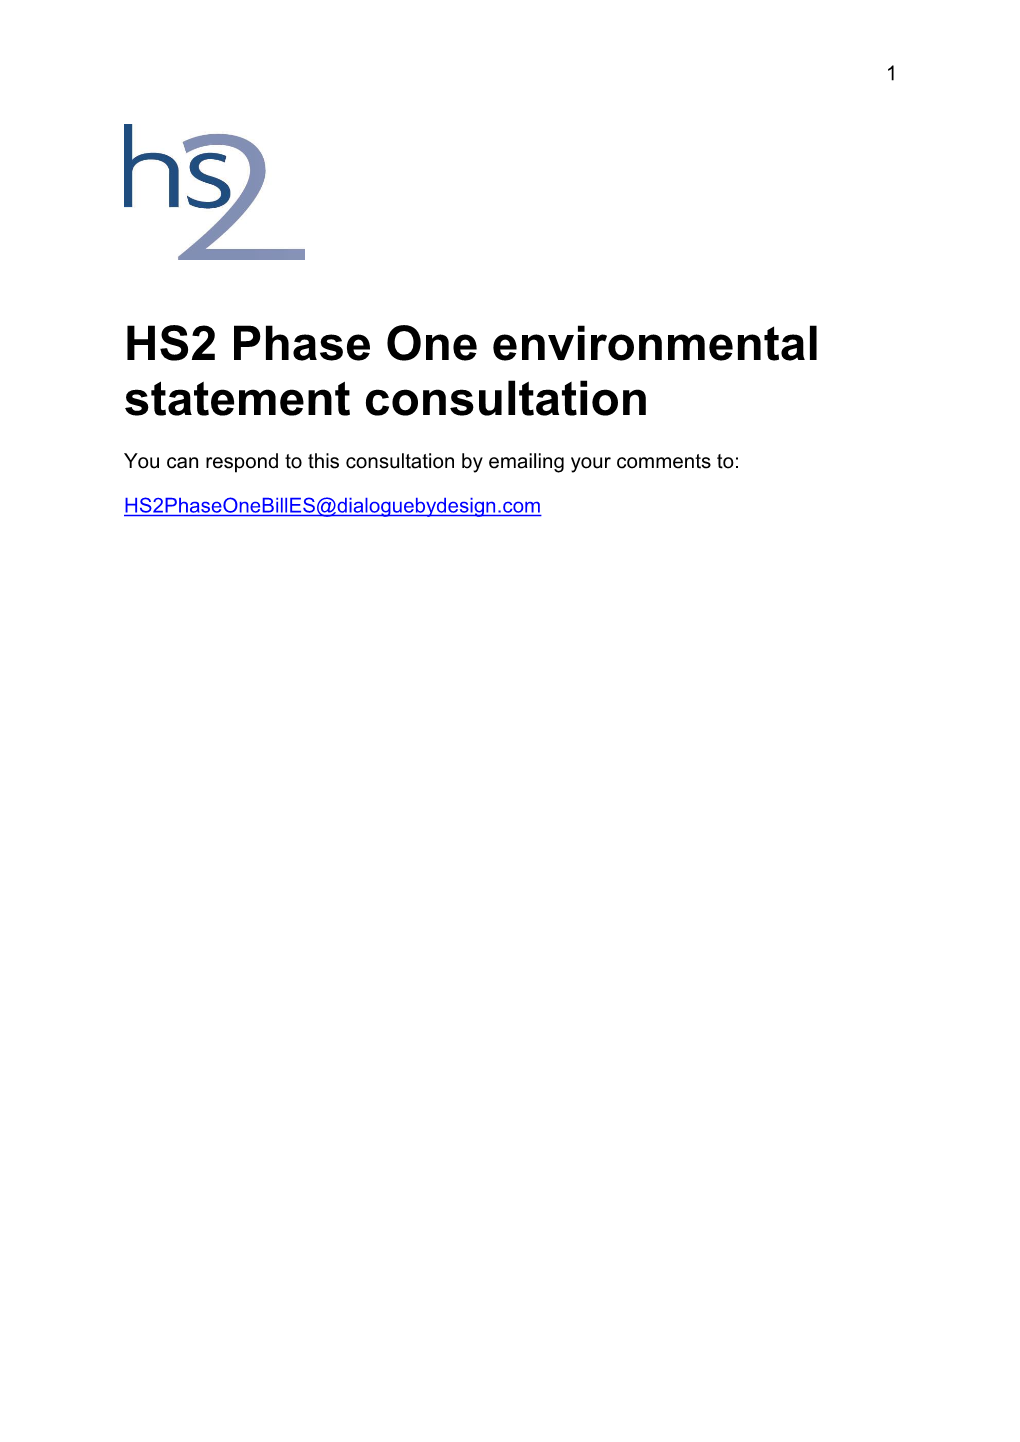 HS2 Phase One Environmental Statement Consultation